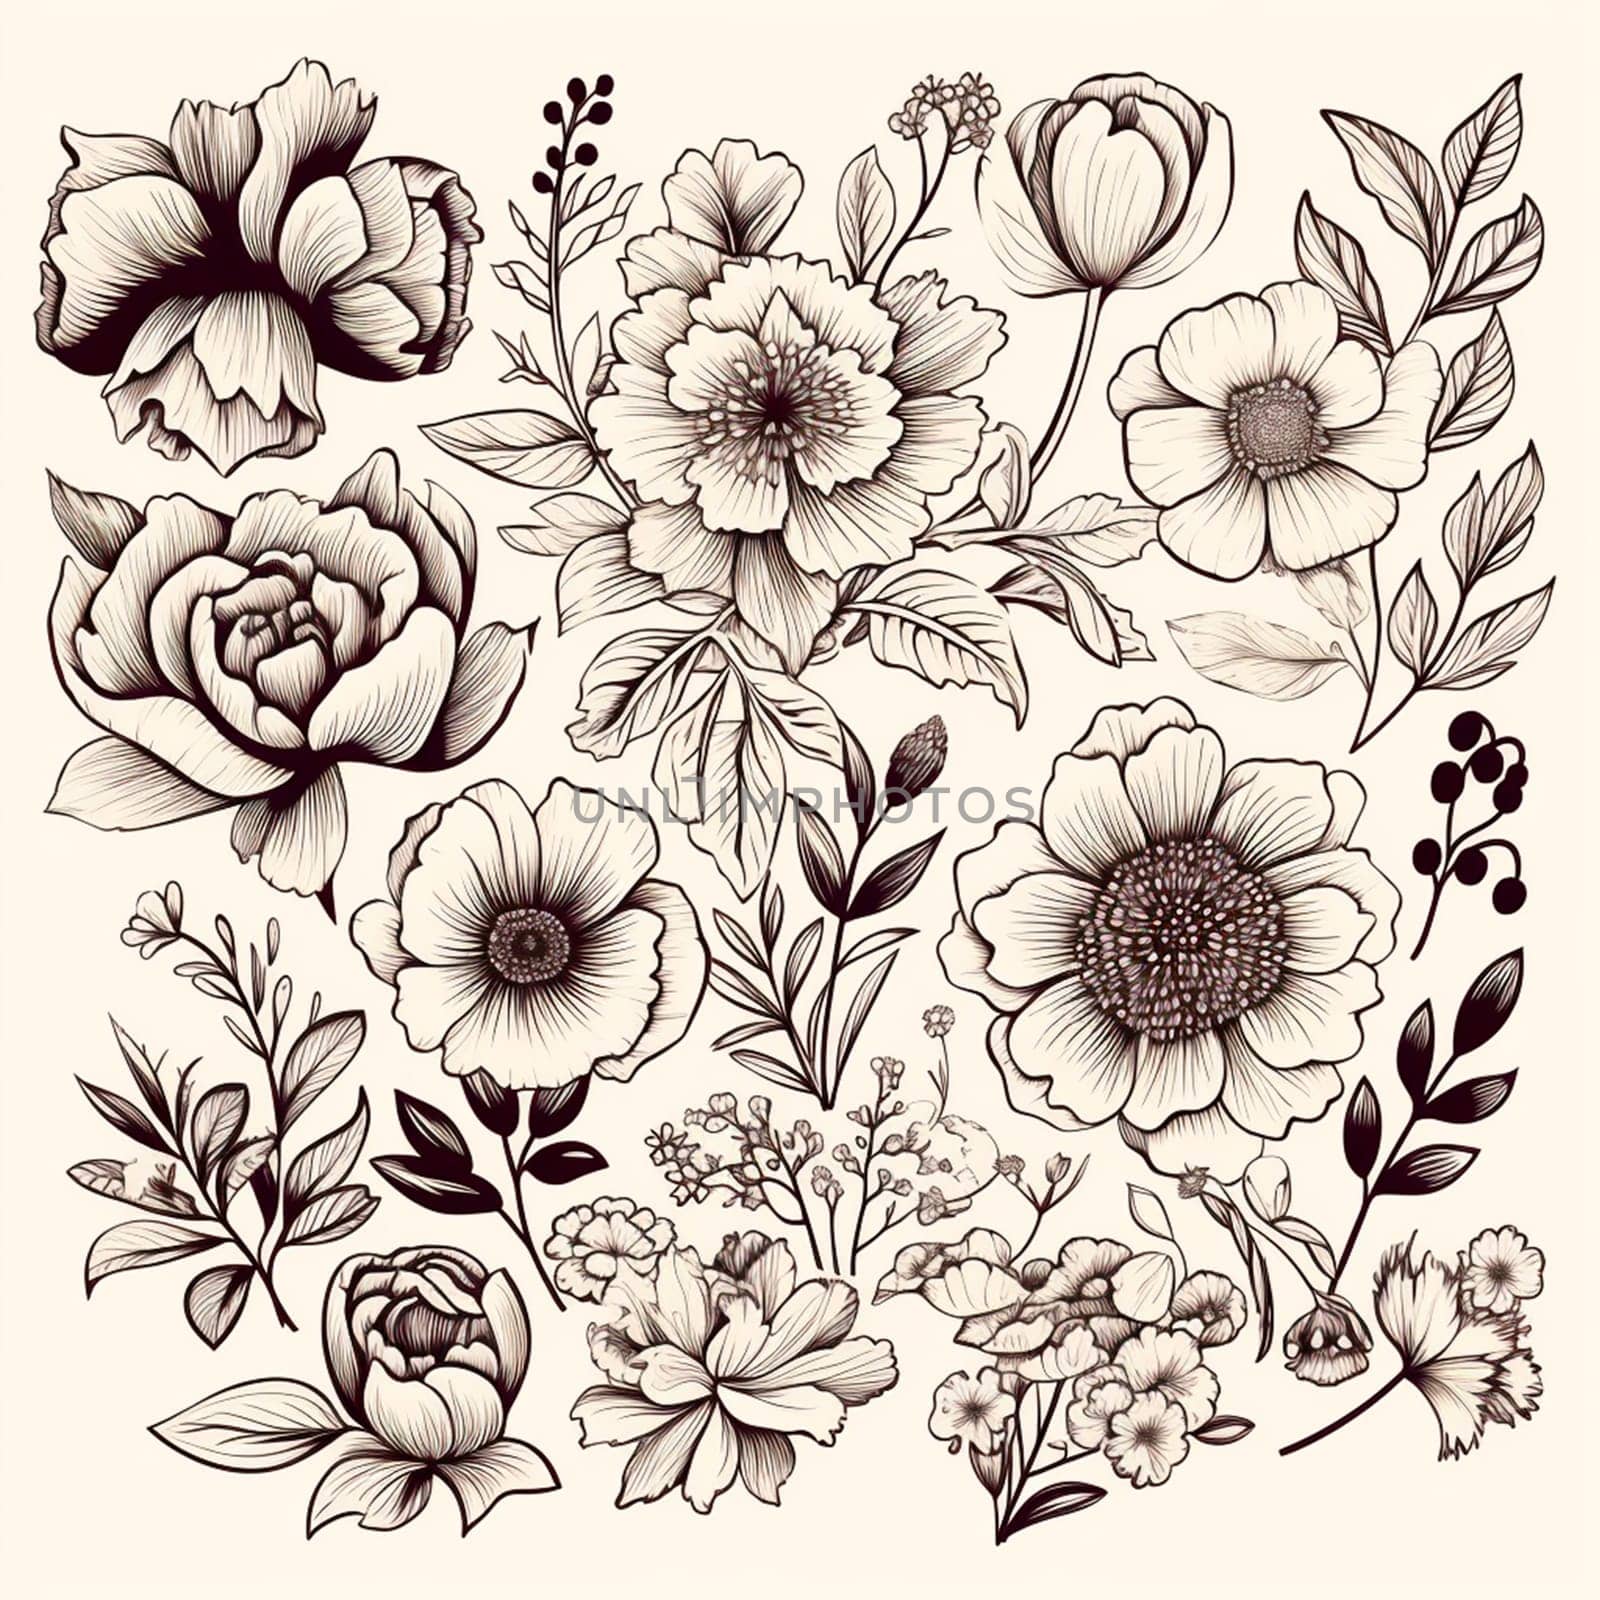 Black and white drawings of flowers and plants, hand drawings by BEMPhoto